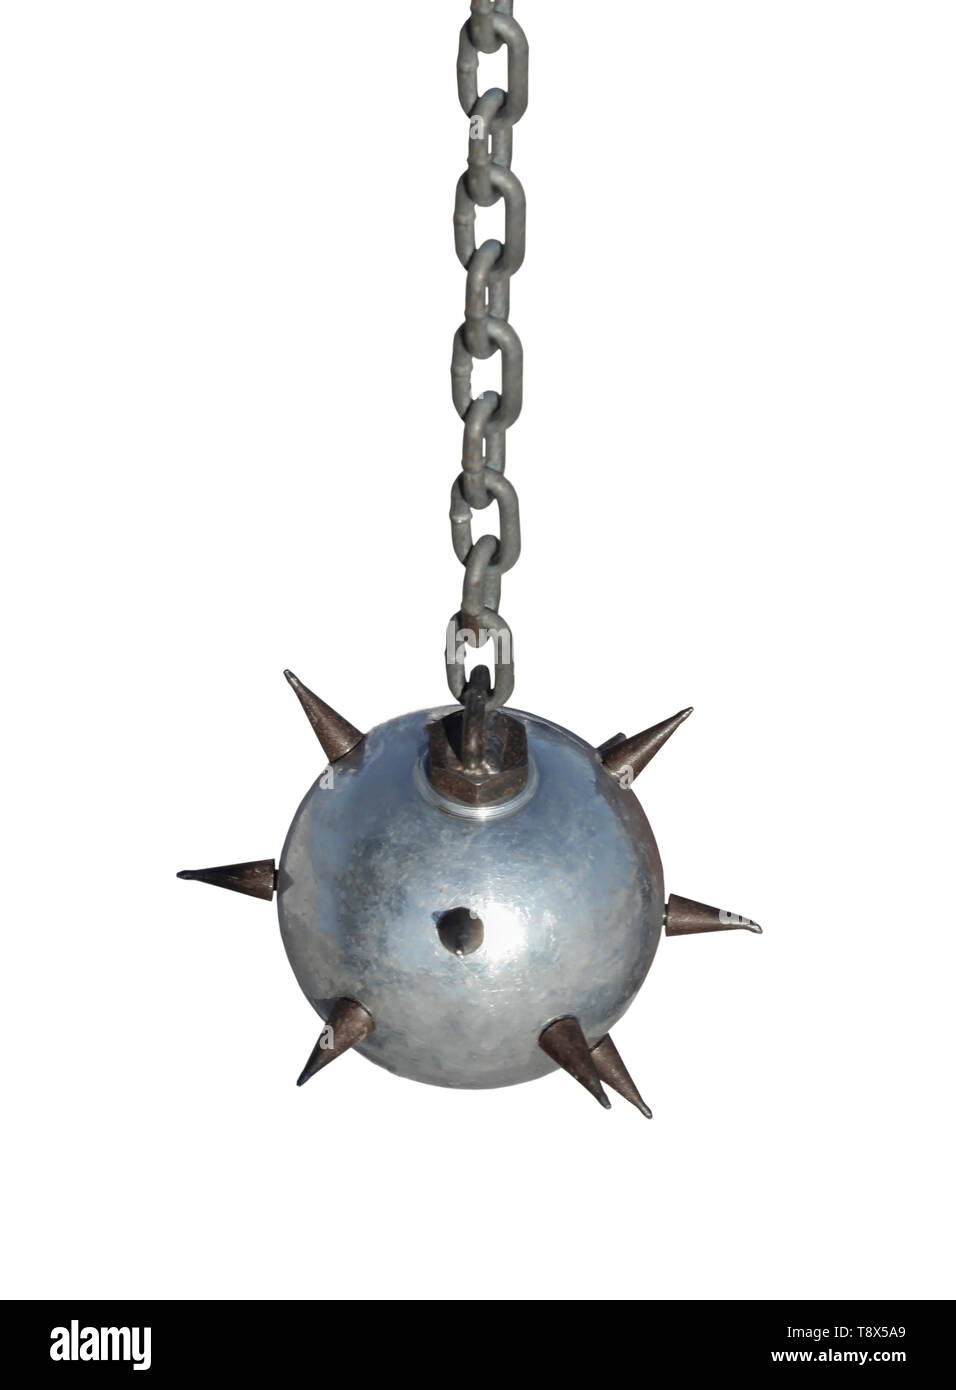 Melee weapons, heavy iron ball with spikes on a chain Stock Photo